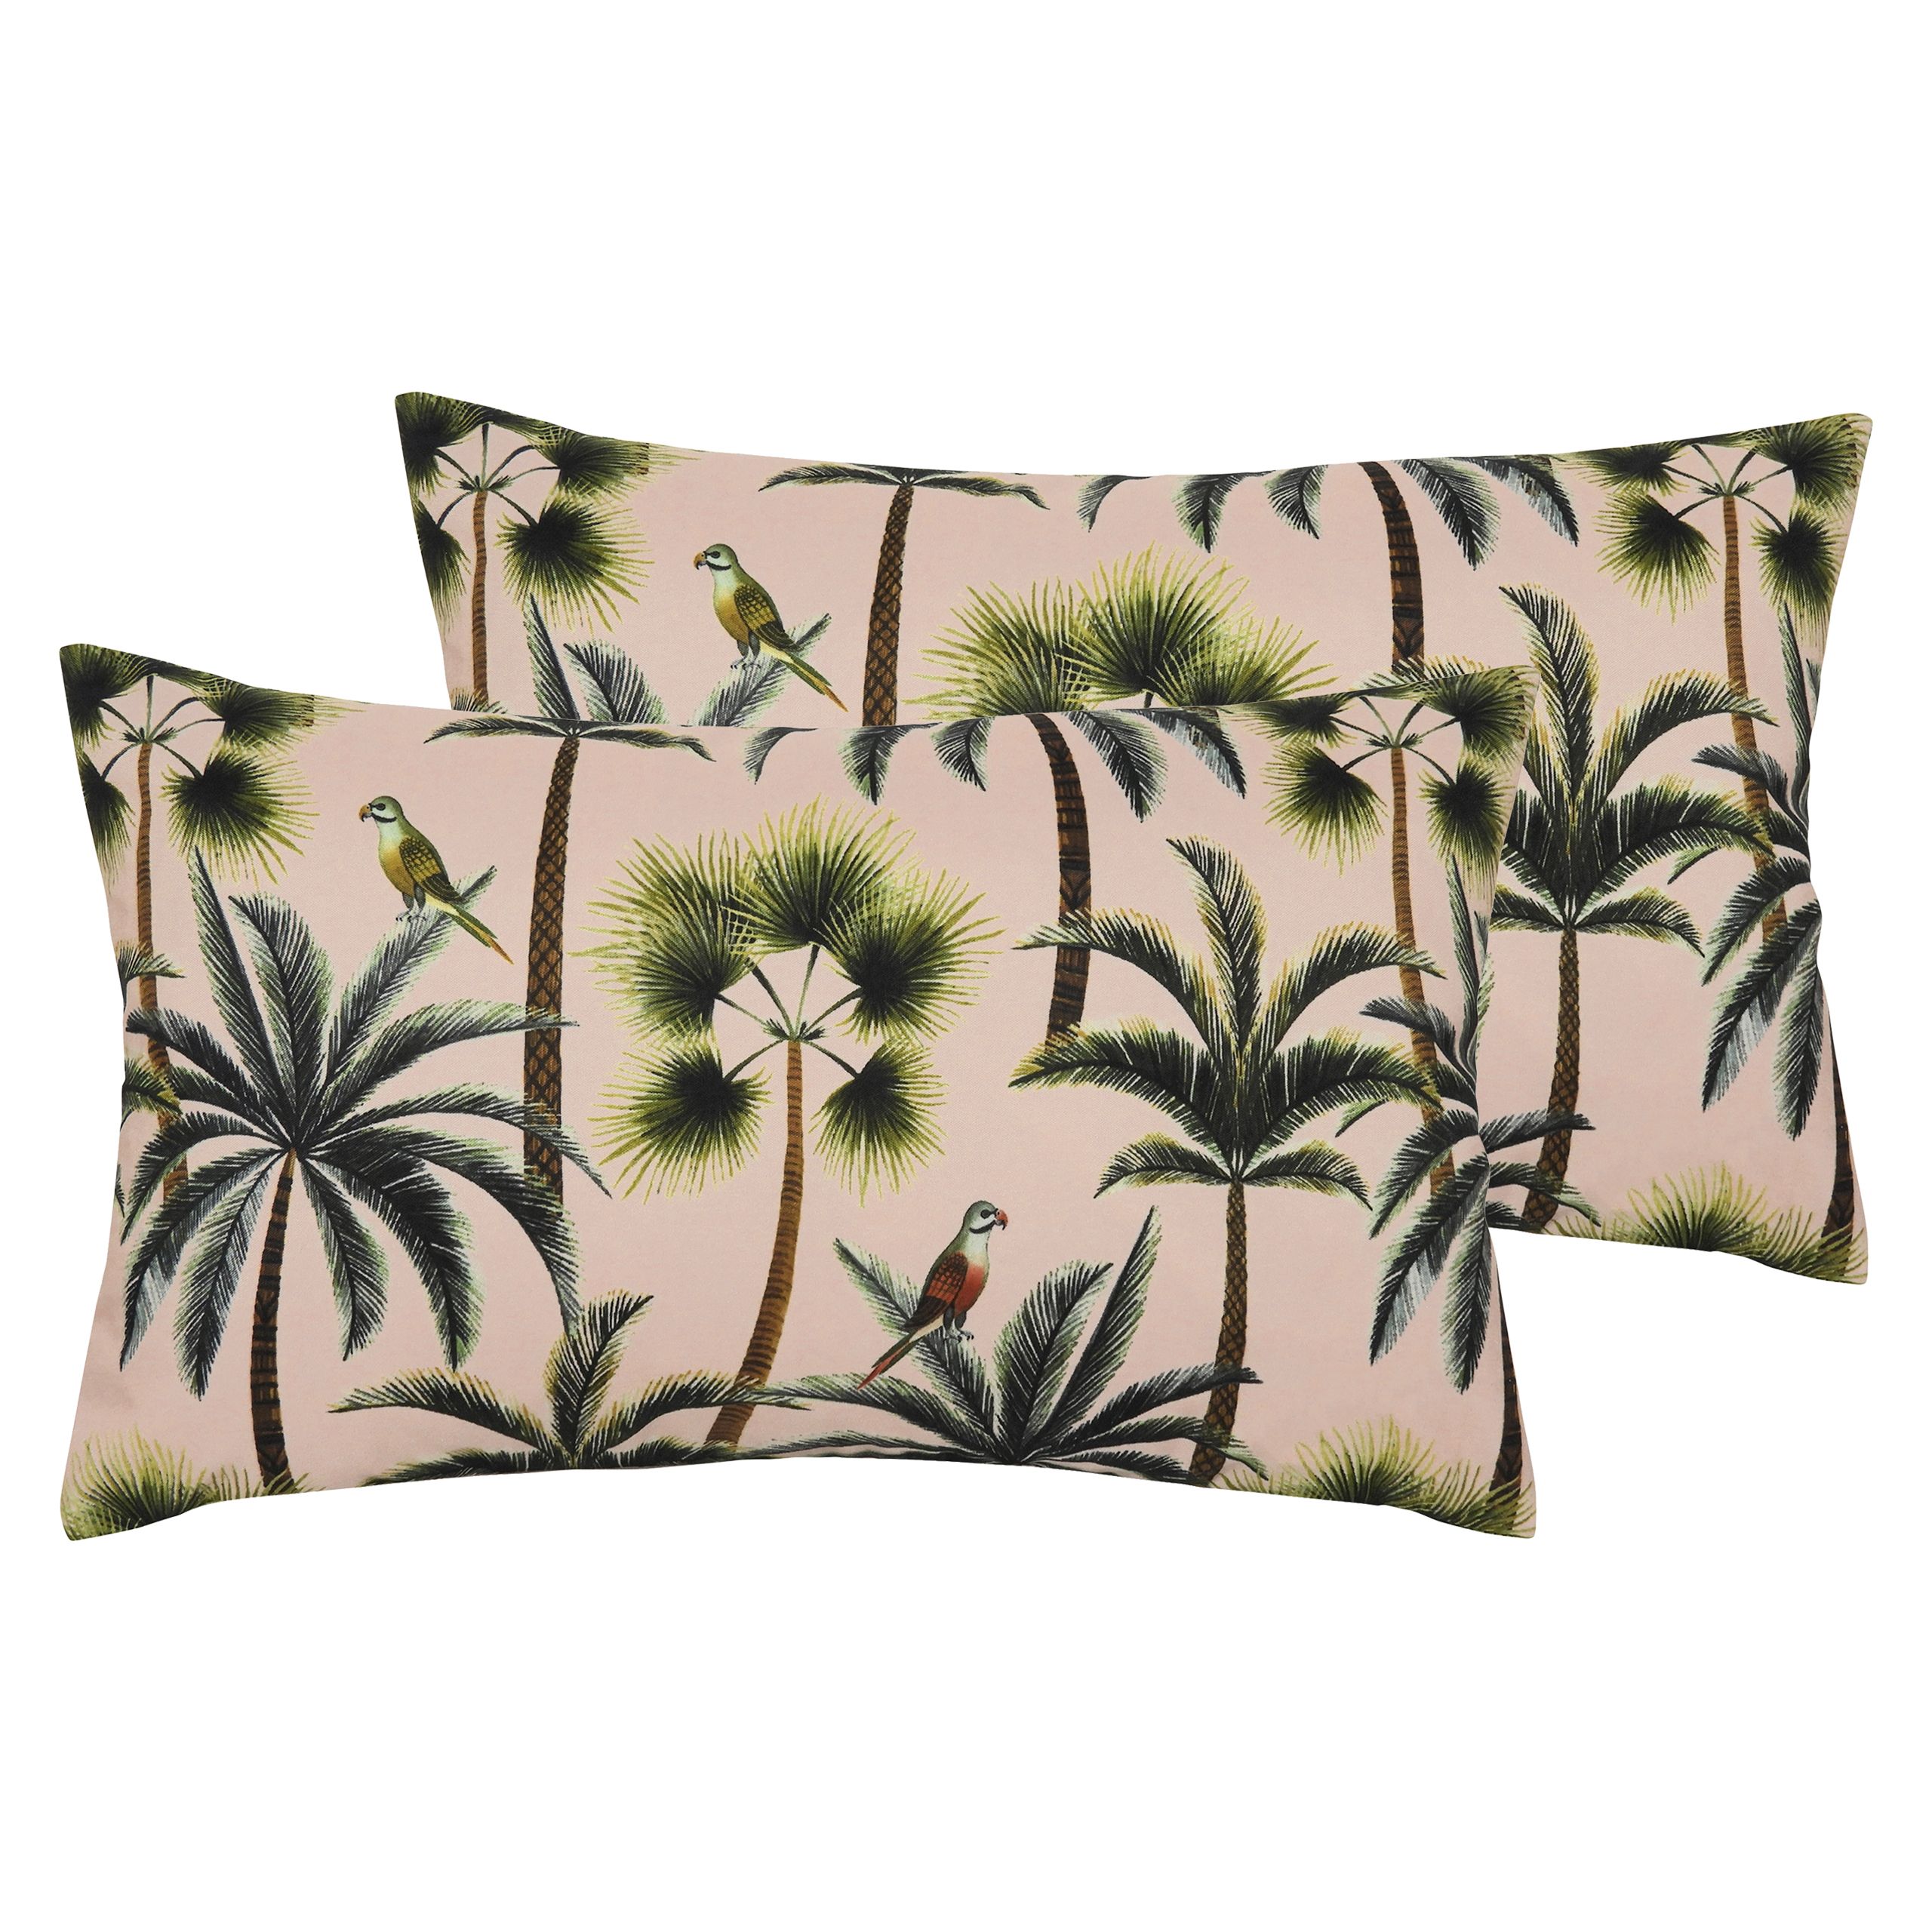 Bring the tropical feels to your outdoor space. This fully reversible design in beautiful pink and green tones is sure to stand out in any garden.